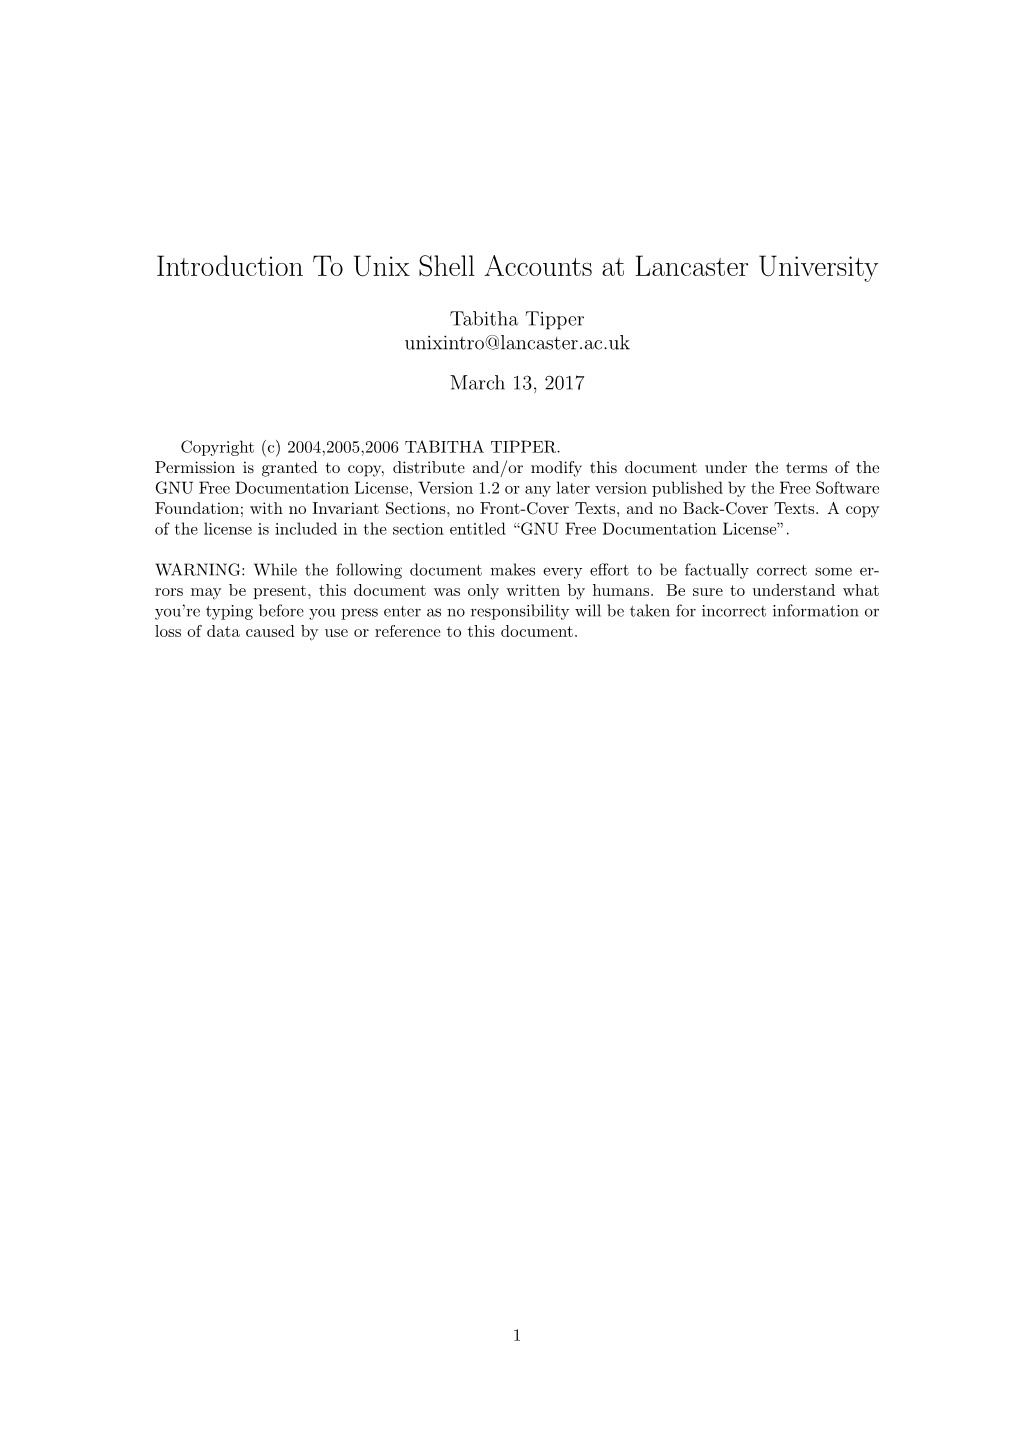 Introduction to Unix Shell Accounts at Lancaster University